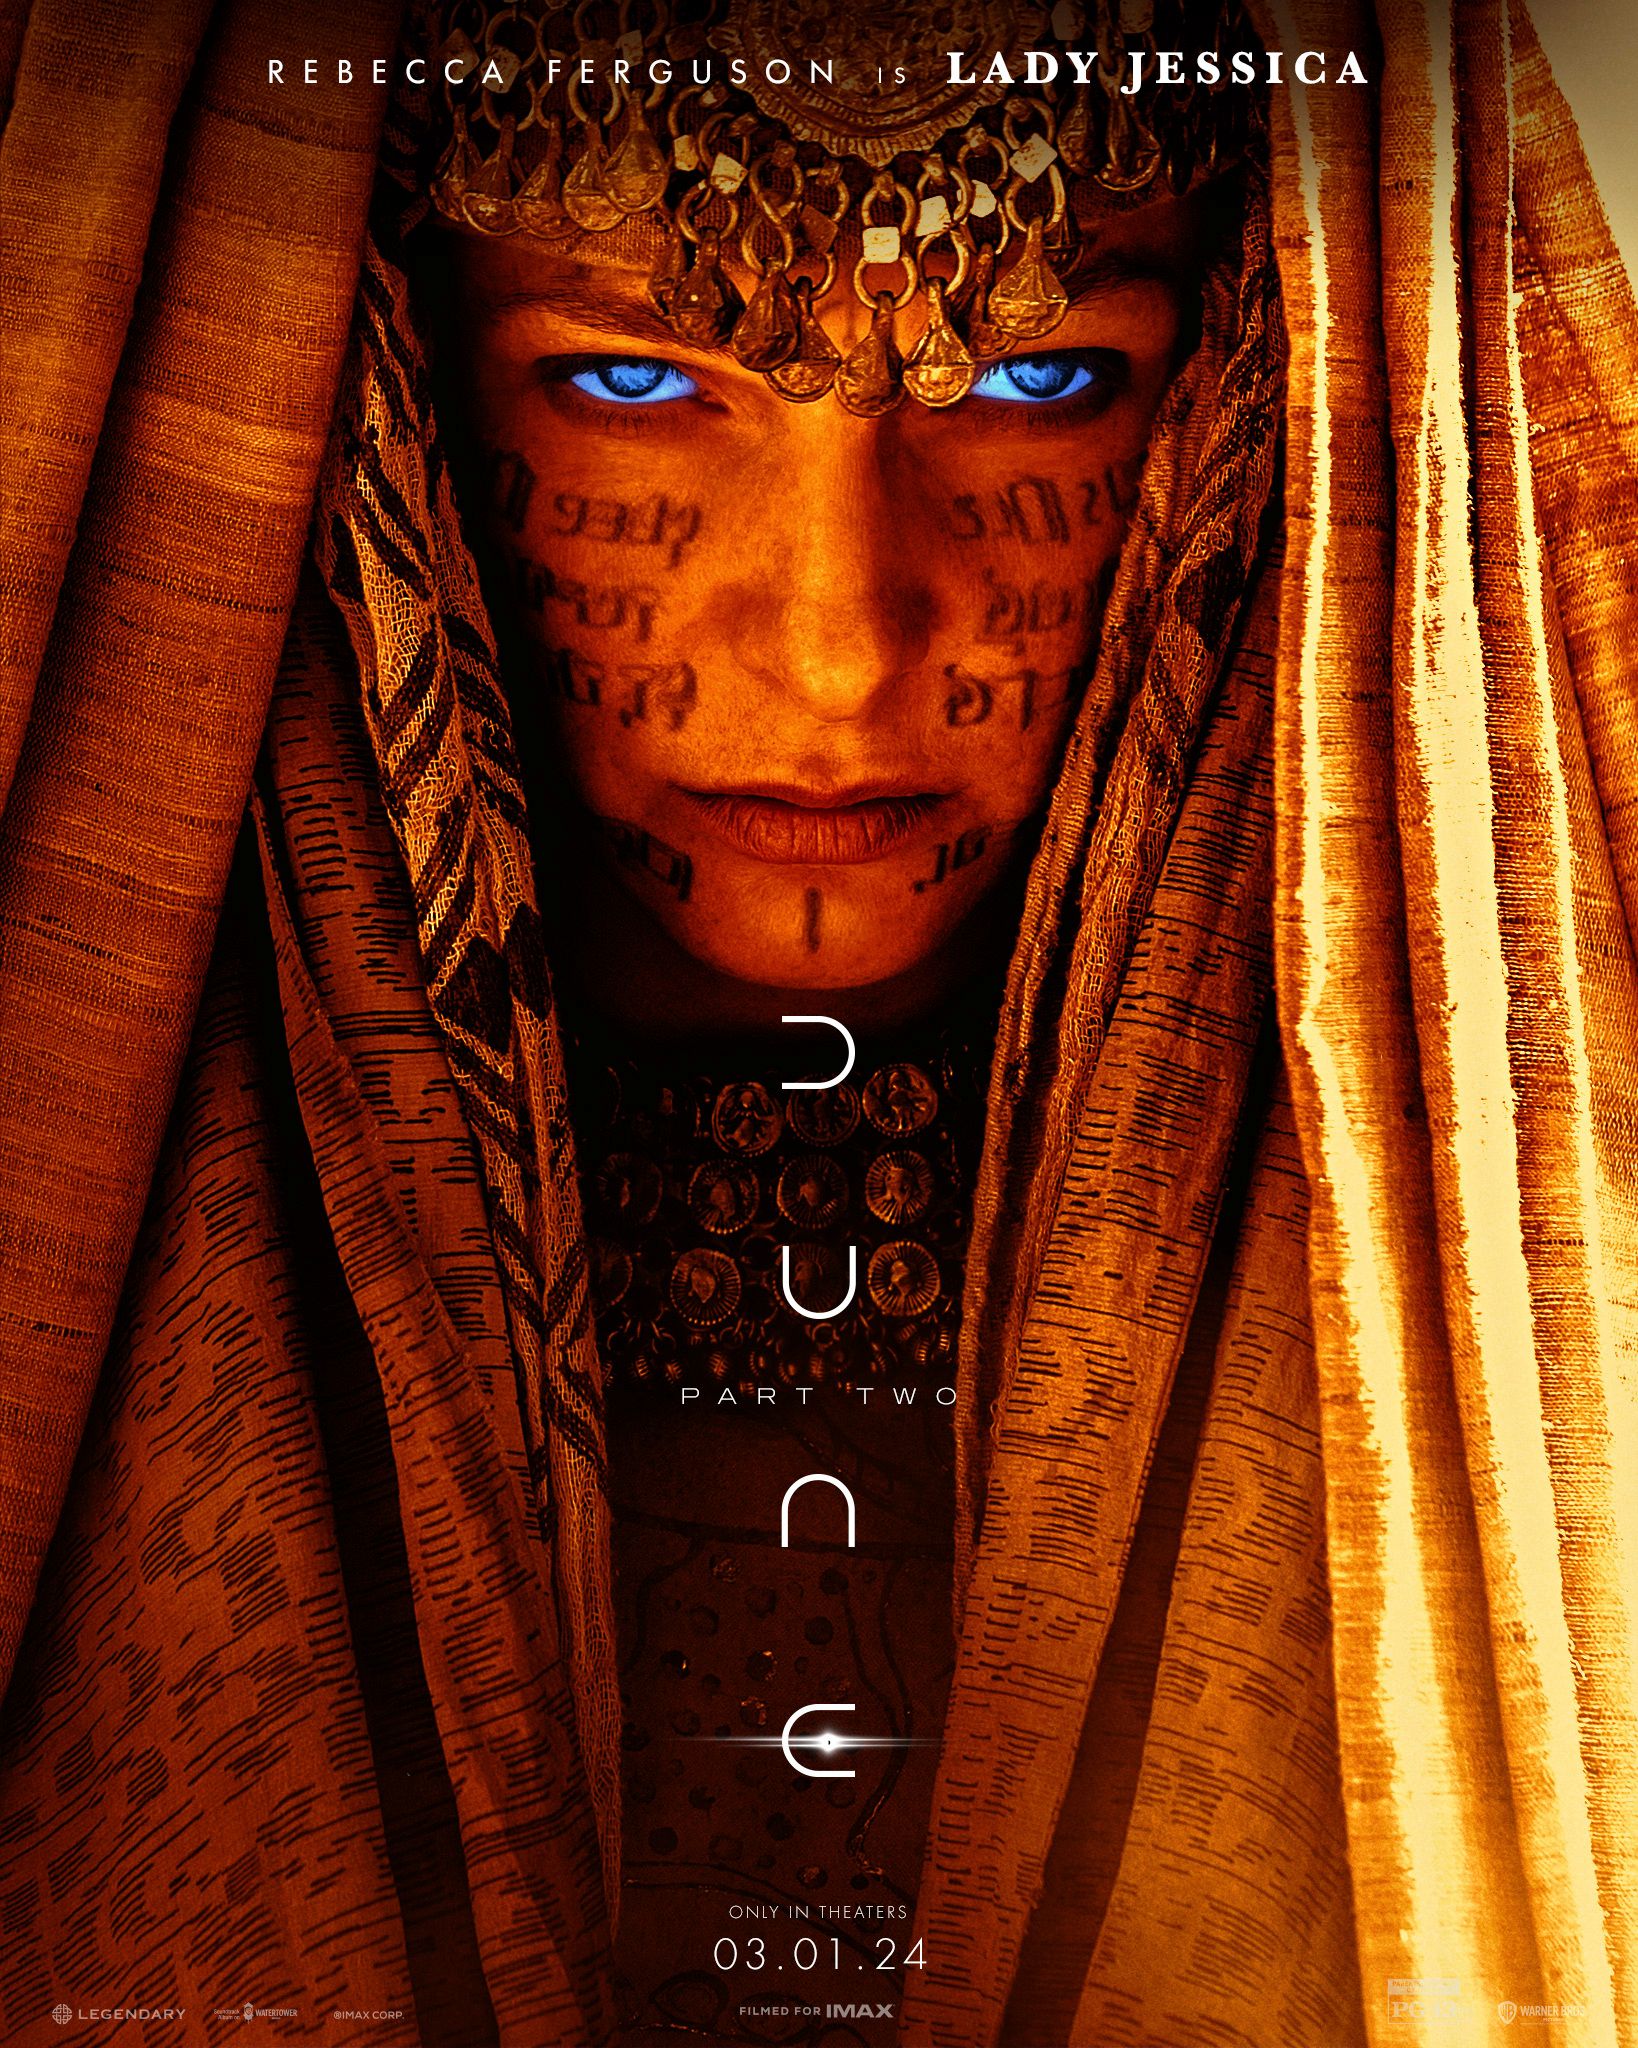 Dune 2 Posters Show Striking Looks At Star-Studded Cast Of New & Returning  Characters